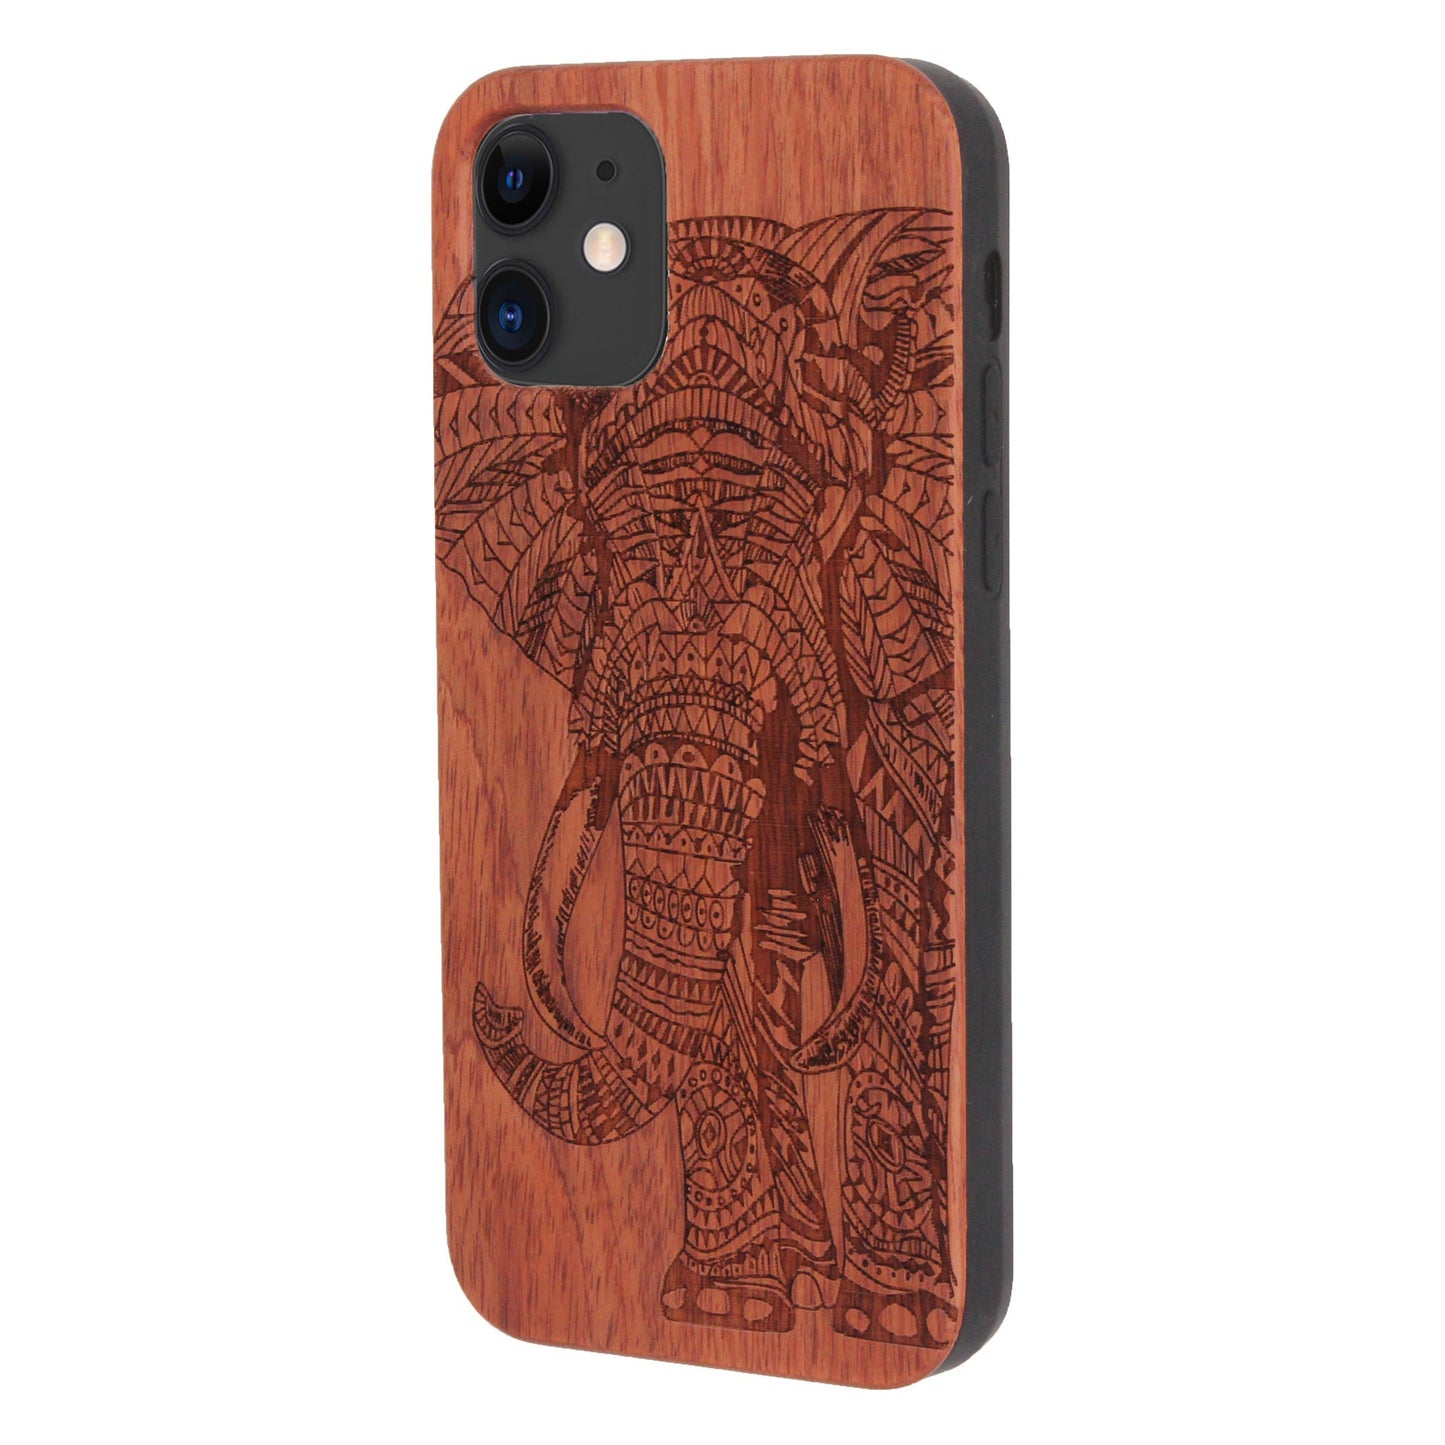 Rosewood Elephant Eden Case for iPhone 11 